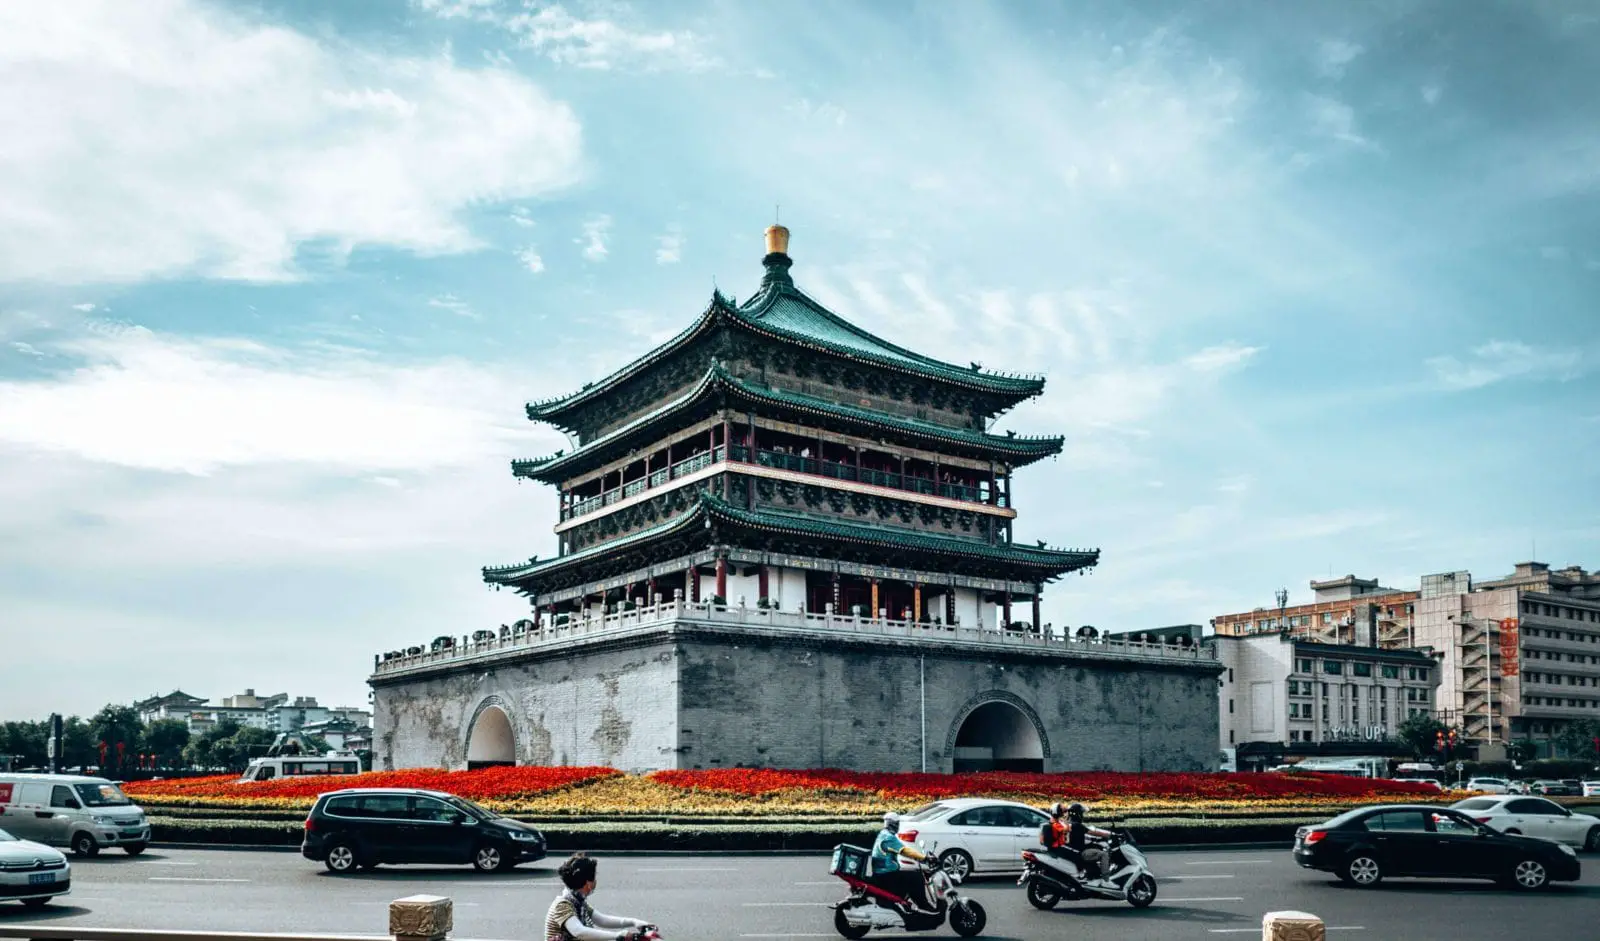 Image of the Bell Tower in Xian China